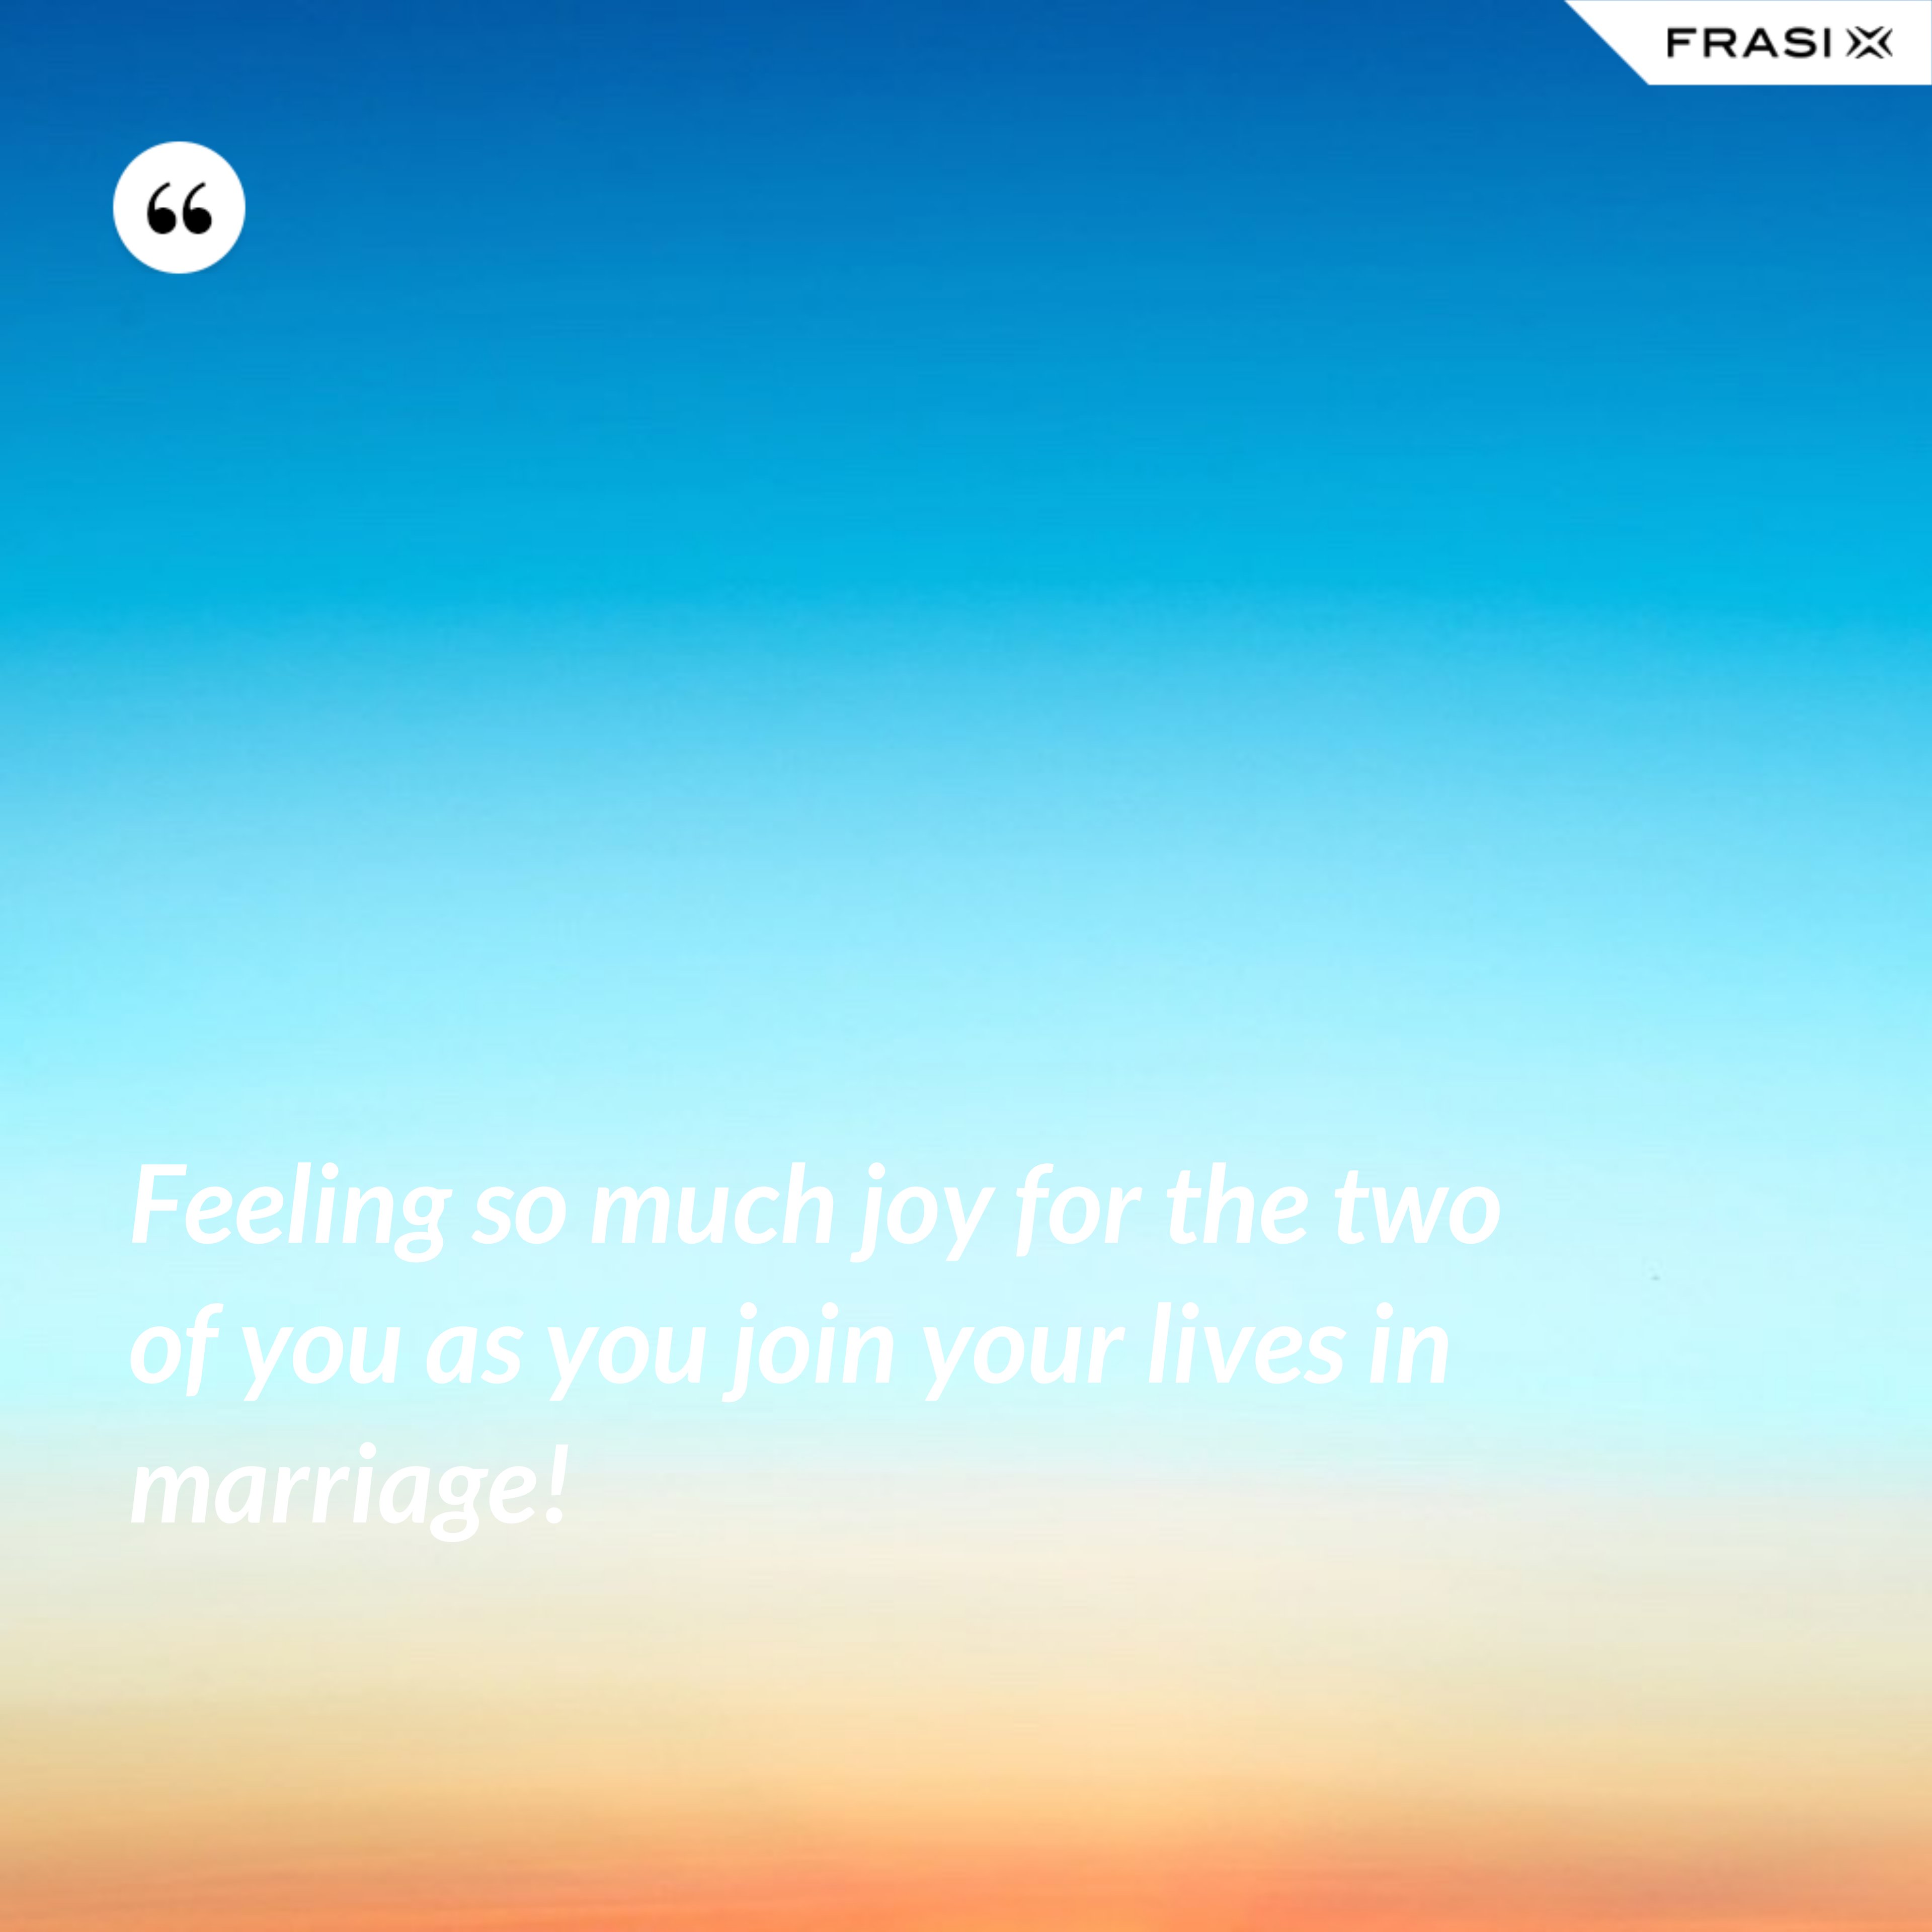 Feeling so much joy for the two of you as you join your lives in marriage! - Anonimo